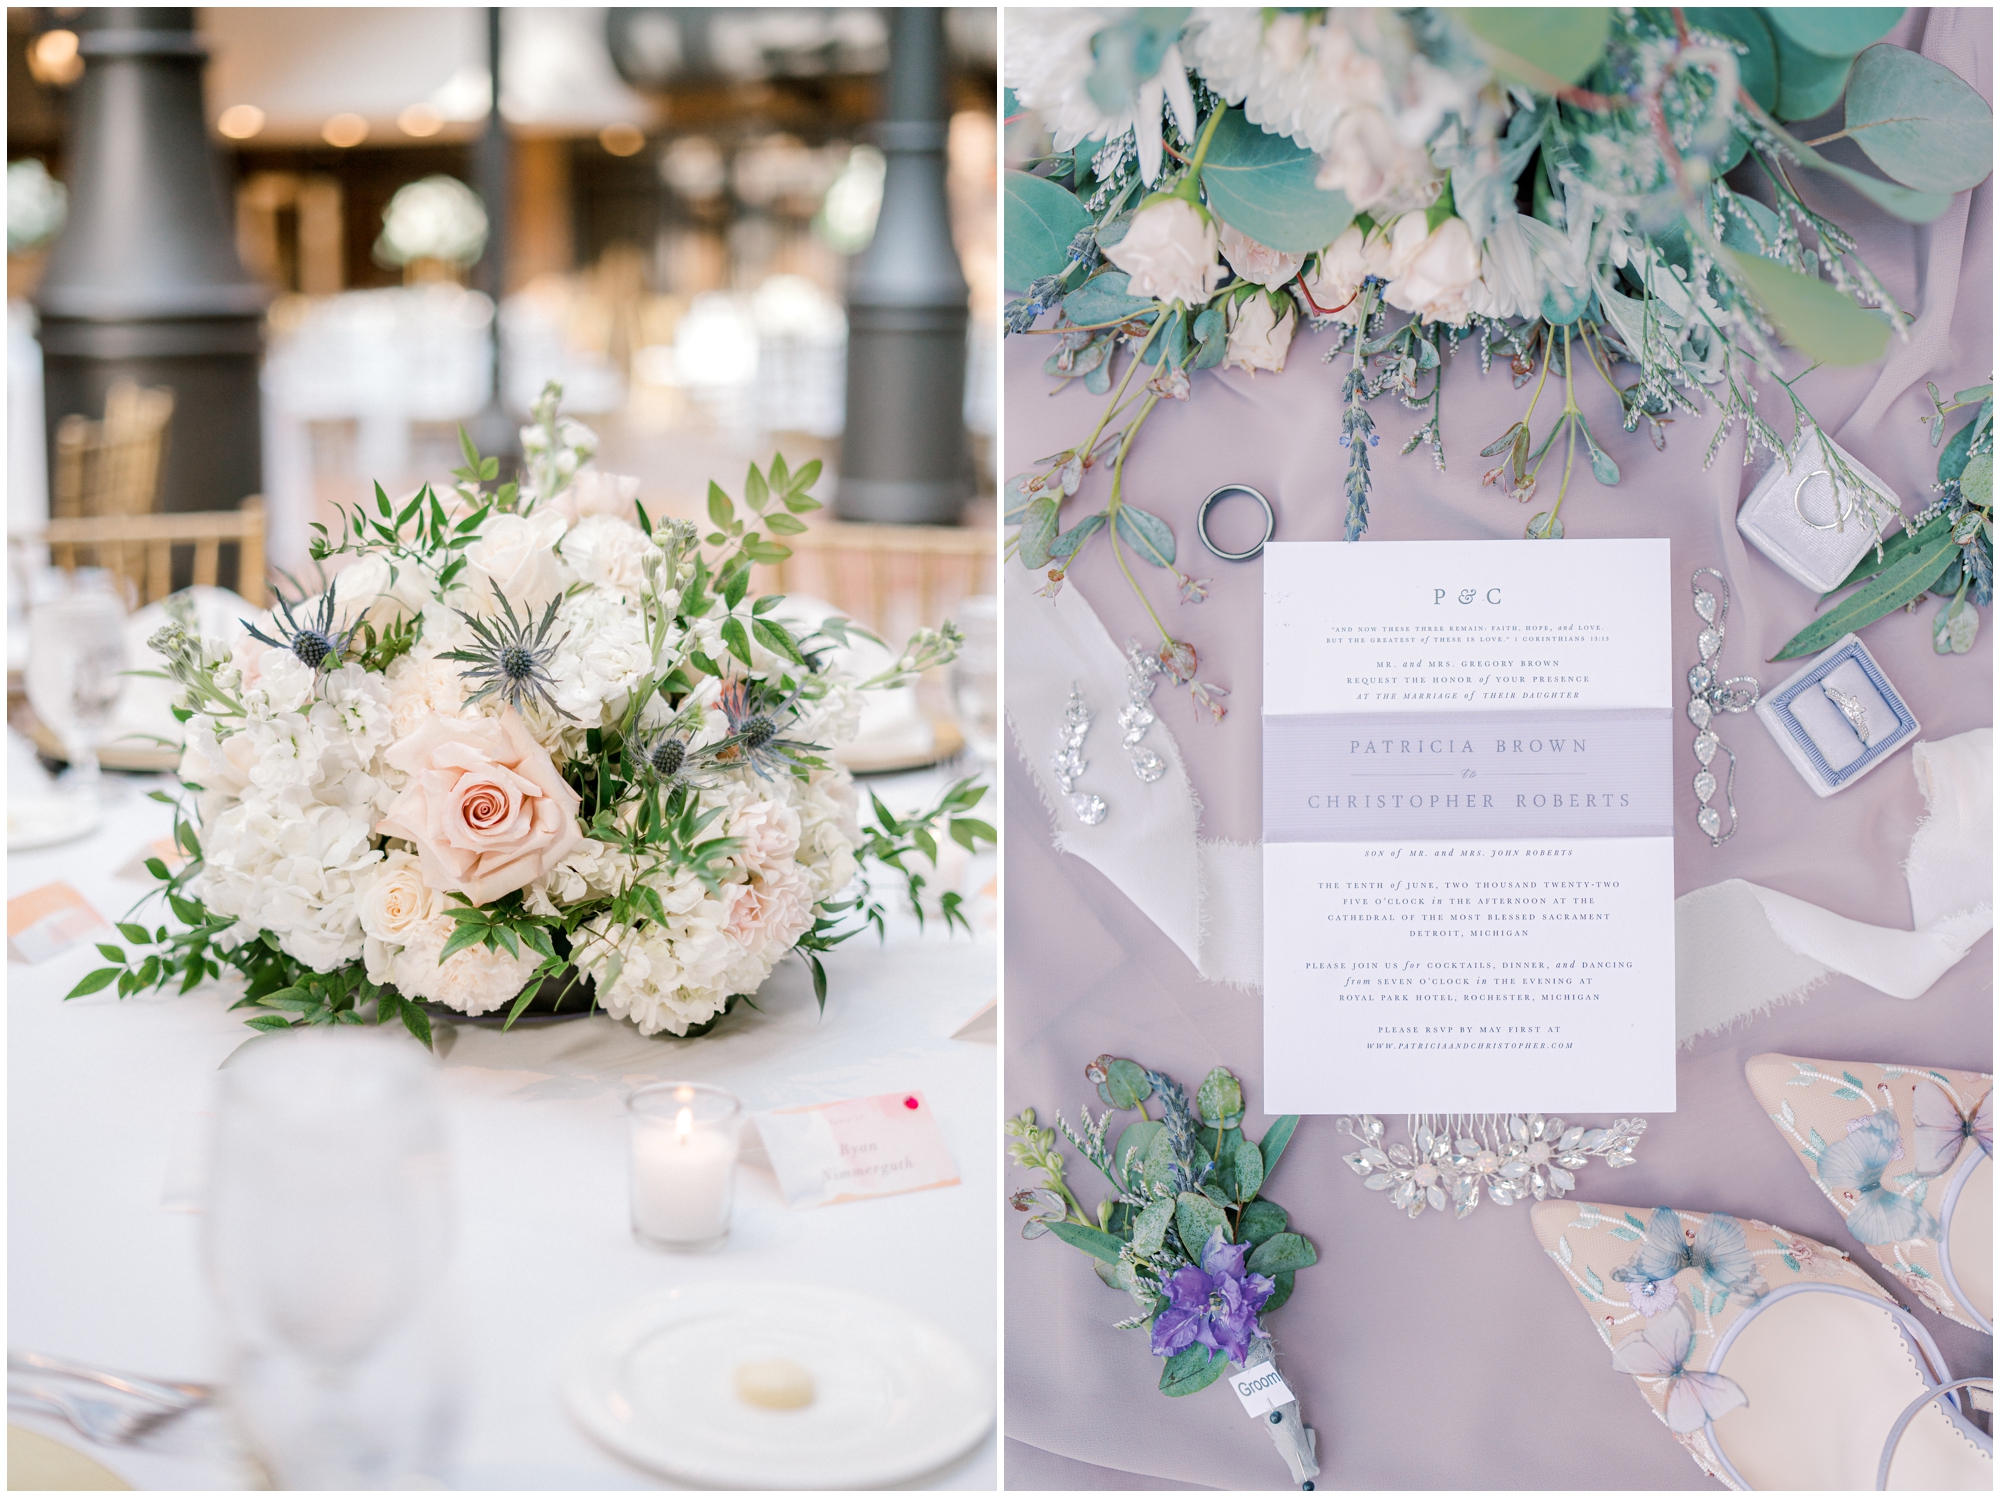 detail shots from your wedding photographer of invitations and centerpieces